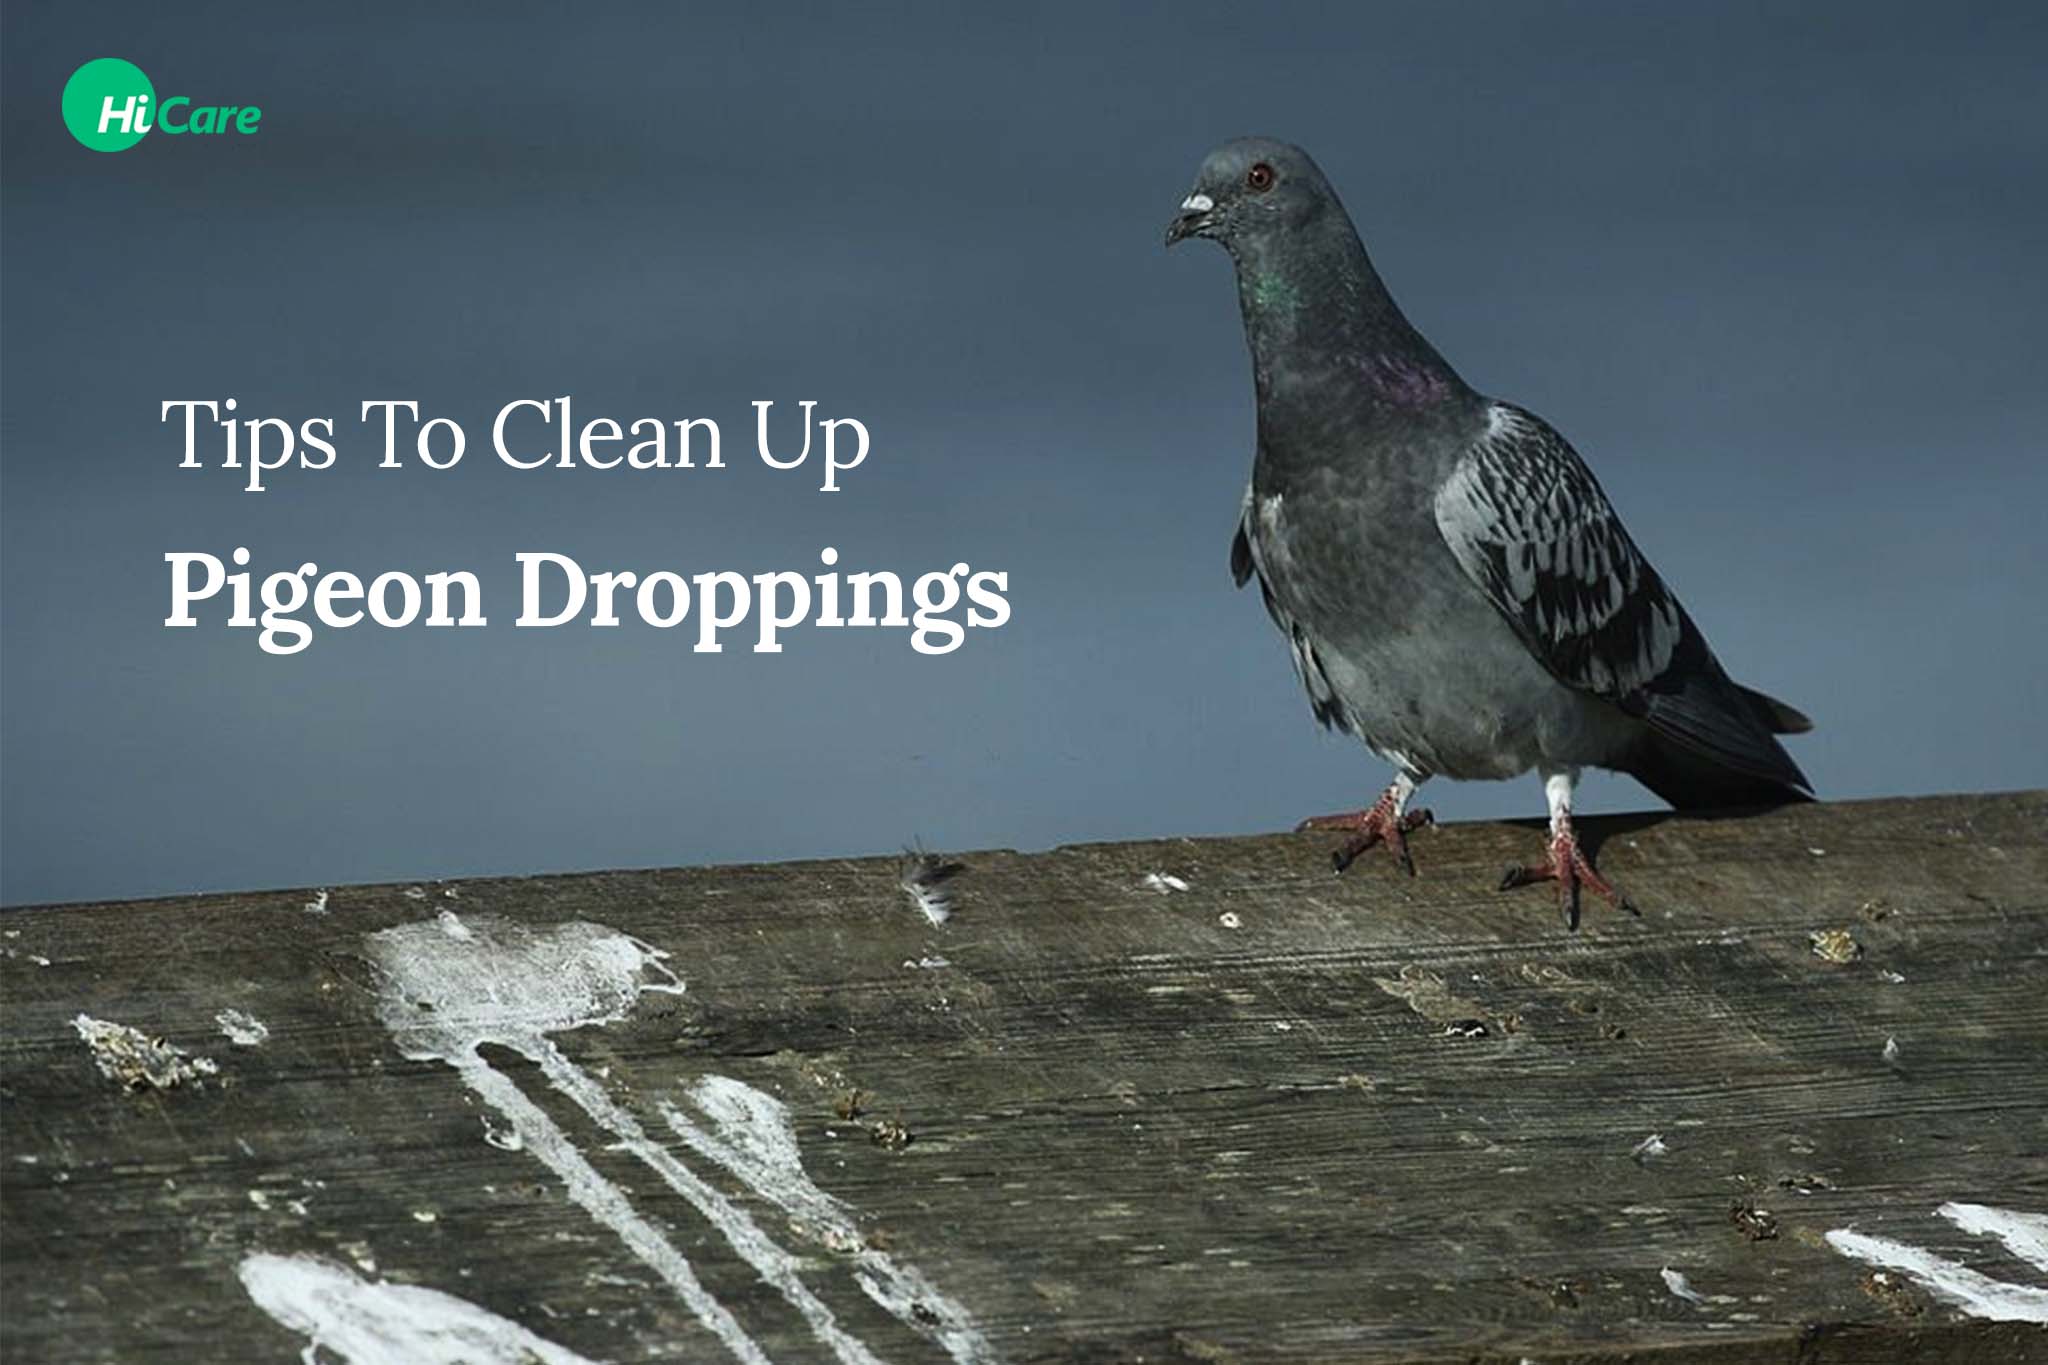 8 Simple Tips to Clean up Pigeon Droppings Properly